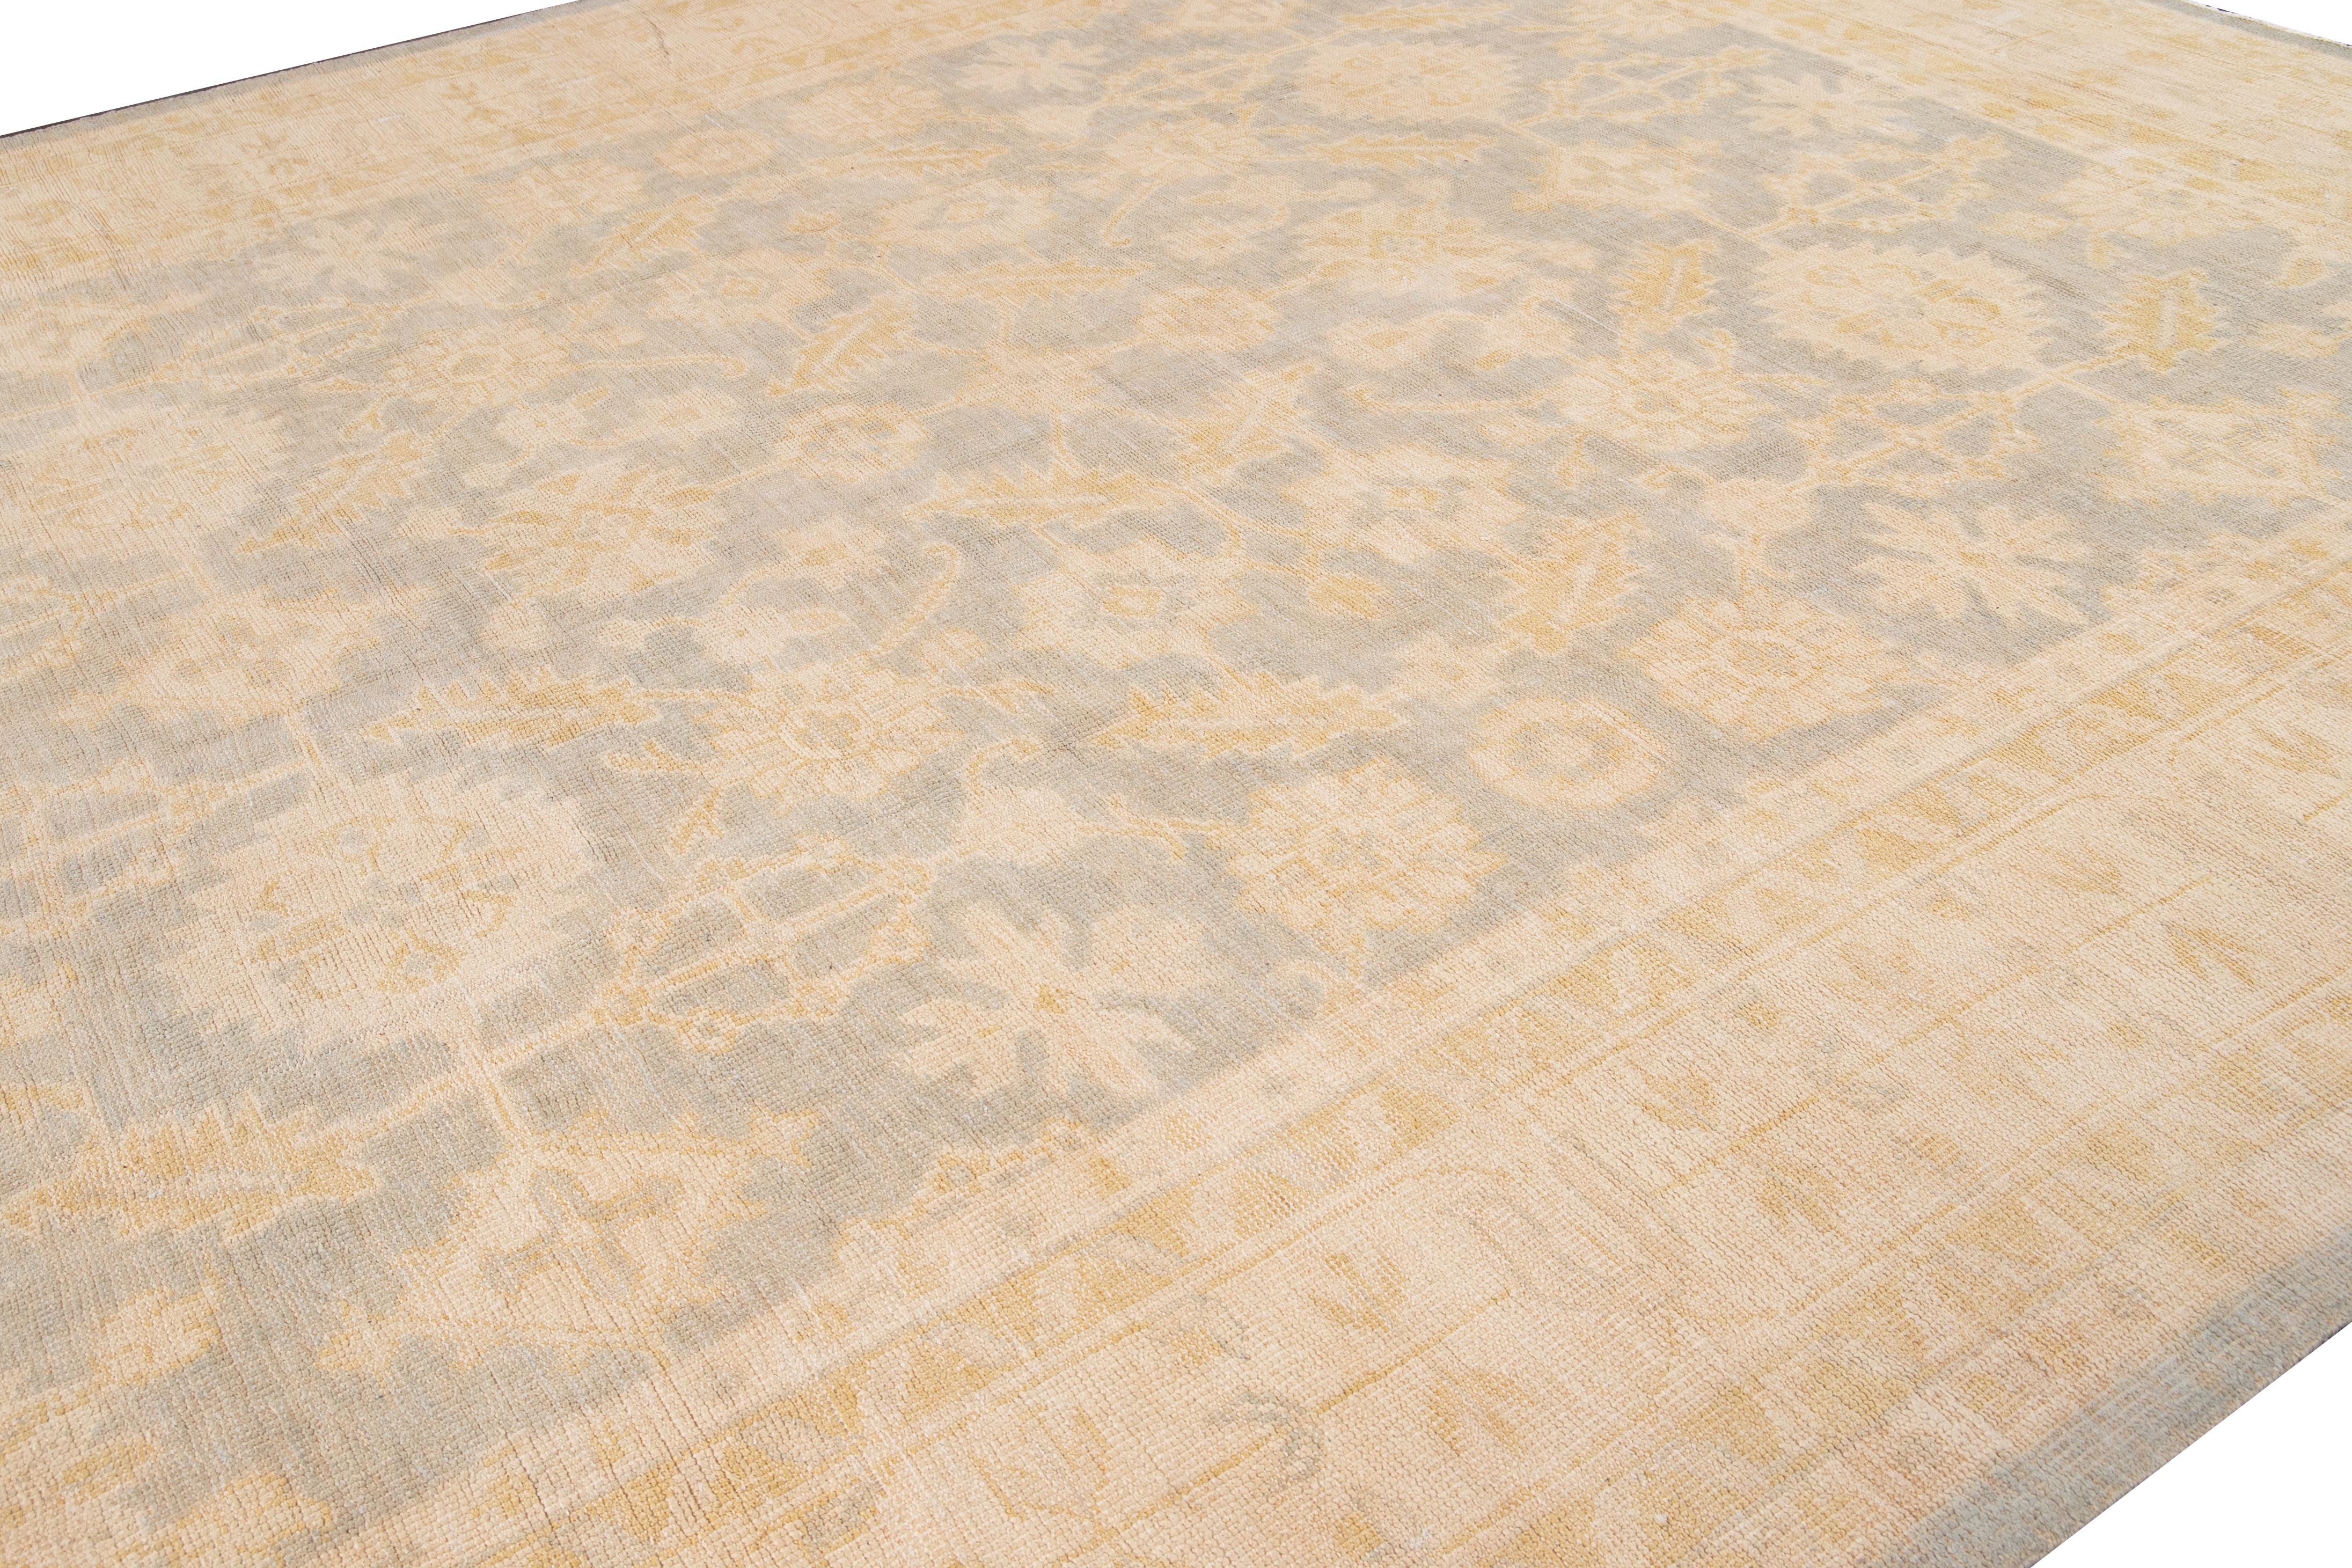 This wool rug in the Oversize Oushak Style is a stunning example of expert craftsmanship and attention to detail. Its intricate floral pattern, adorned with beige and brown accents, adds a touch of allure to any décor. The rug's base color is a